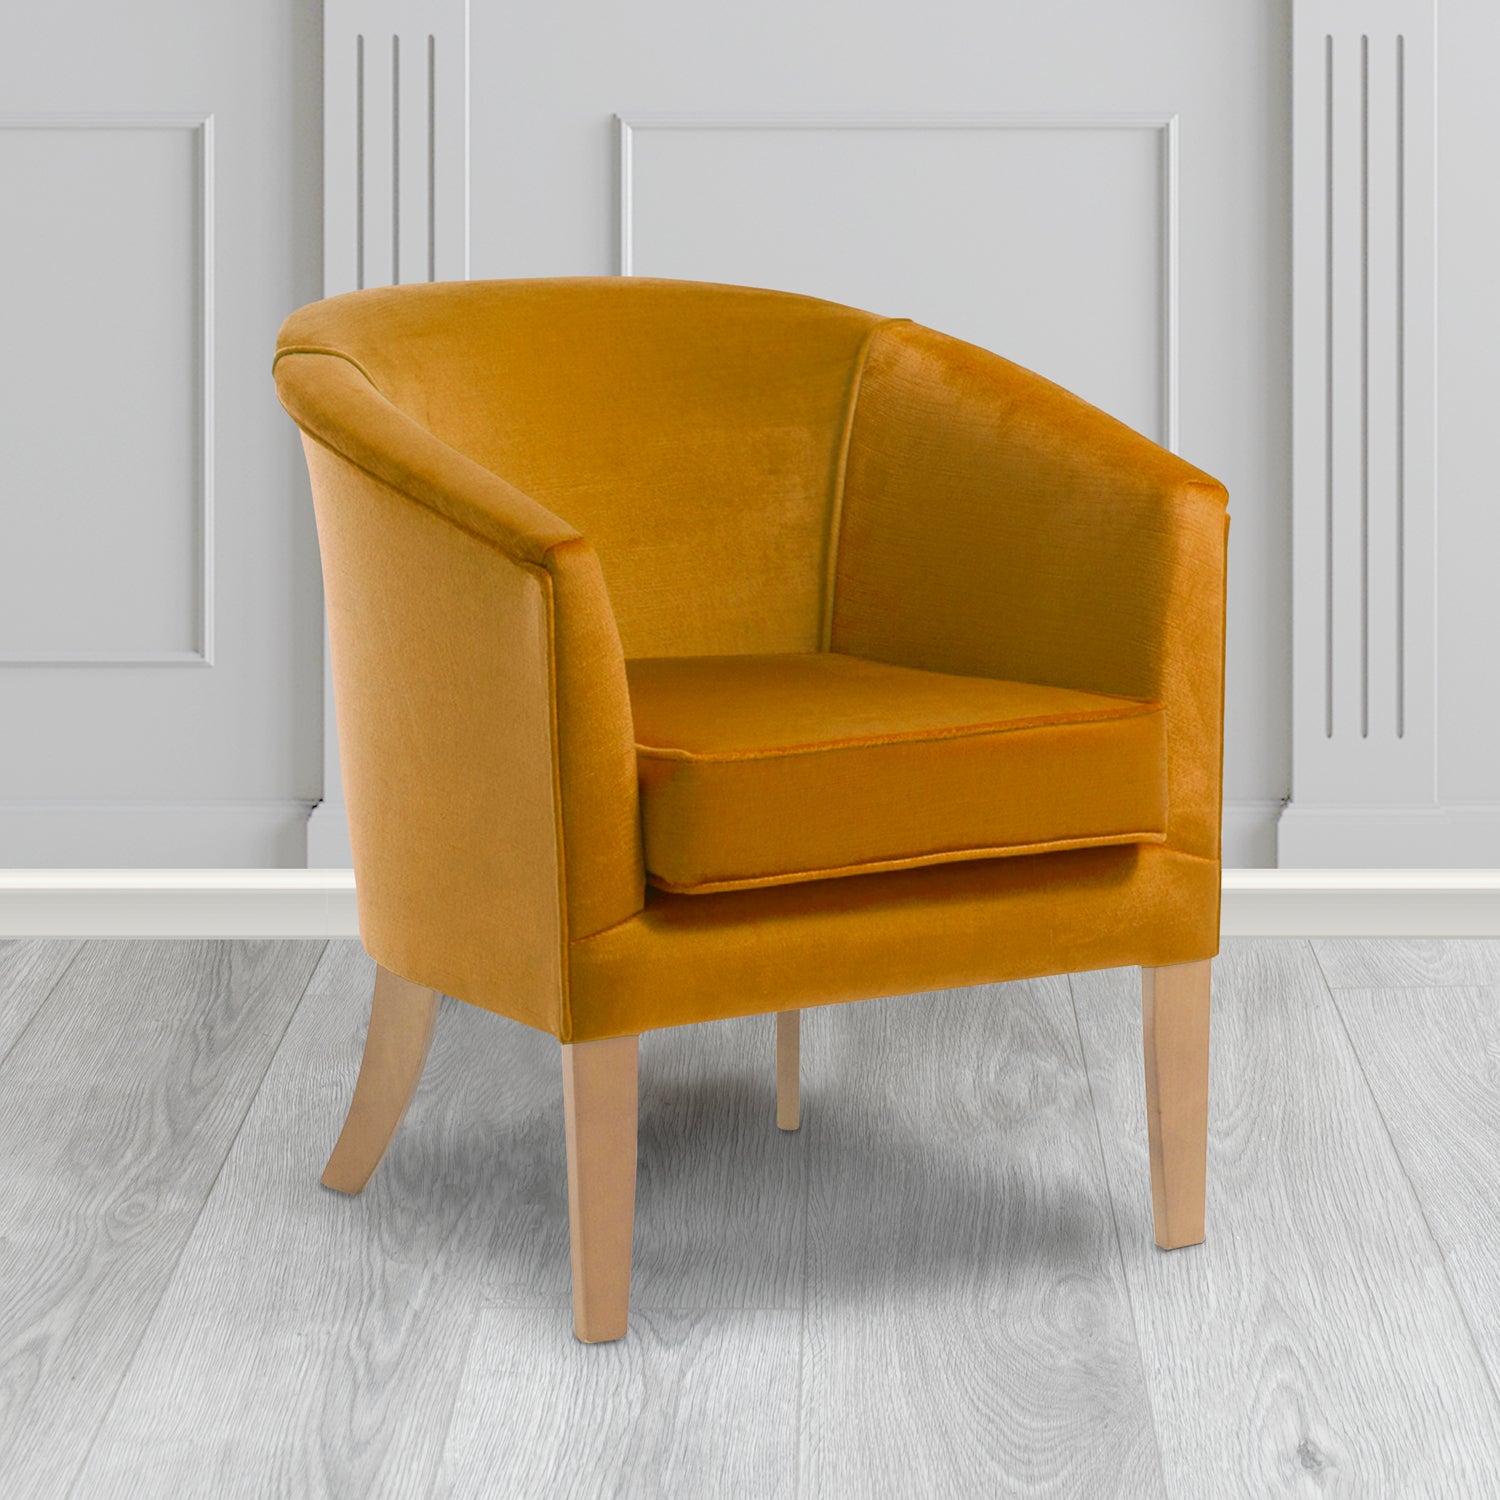 Jazz Tub Chair in Noble 824 Ochre Crib 5 Velvet Fabric - Water Resistant - The Tub Chair Shop